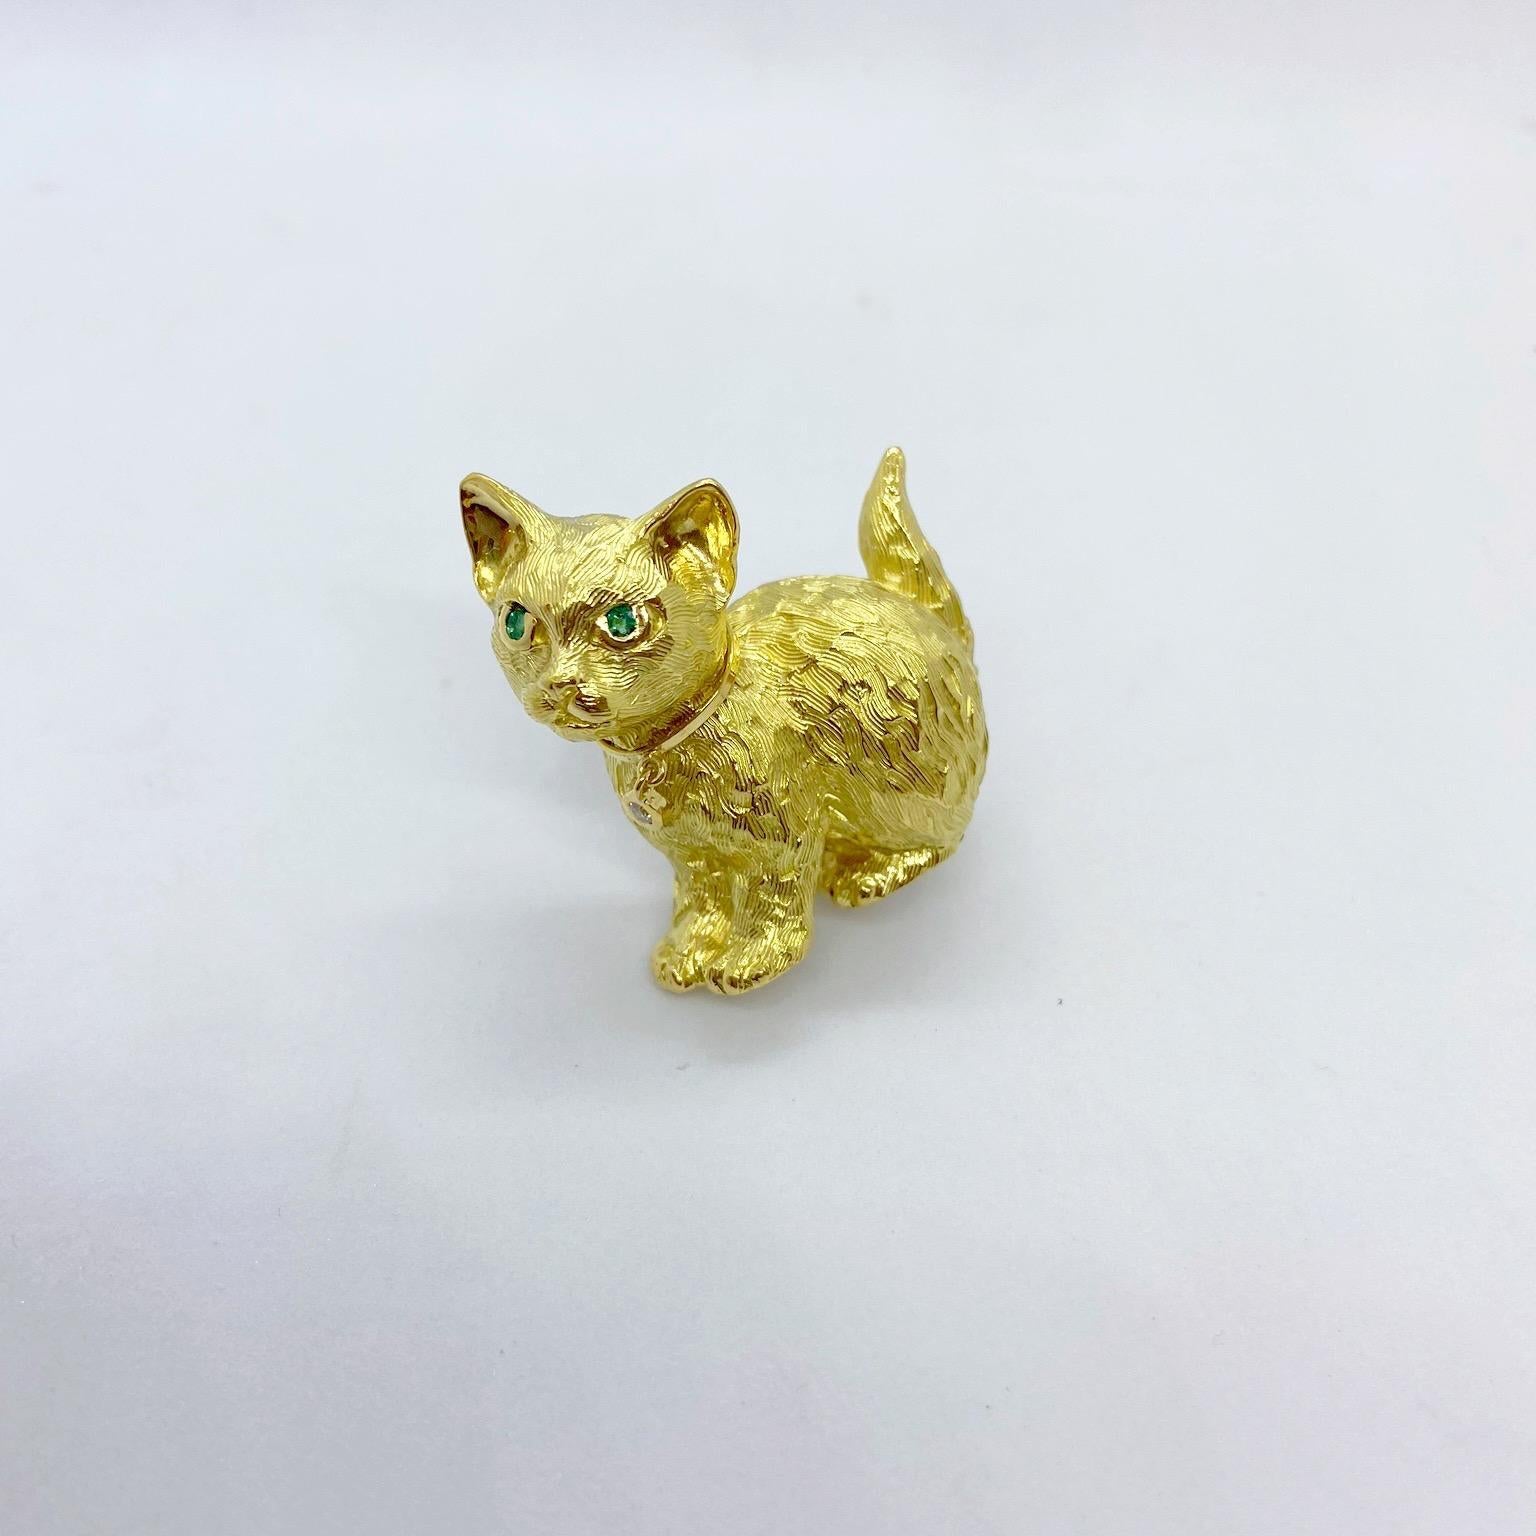 Crafted by Roger Guillochon ,from France for Cellini Jewelers, this 18 karat yellow gold cat brooch depicts magnificent craftsmanship. The cat's body is etched in a satin/hi polish finish. His eyes are set with emeralds and from his collar dangles a